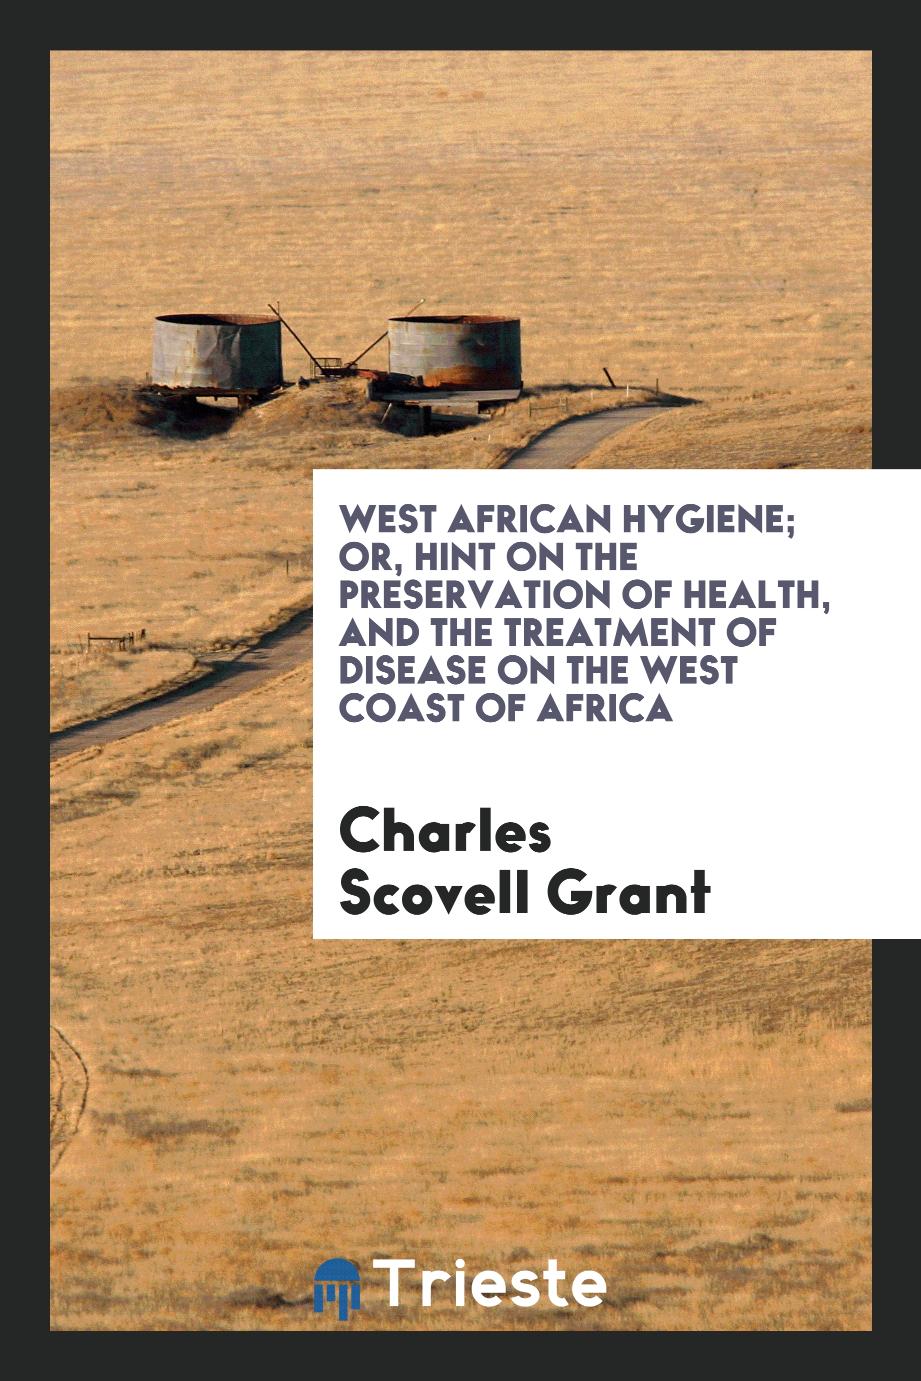 West African hygiene; or, hint on the preservation of health, and the treatment of disease on the West Coast of Africa